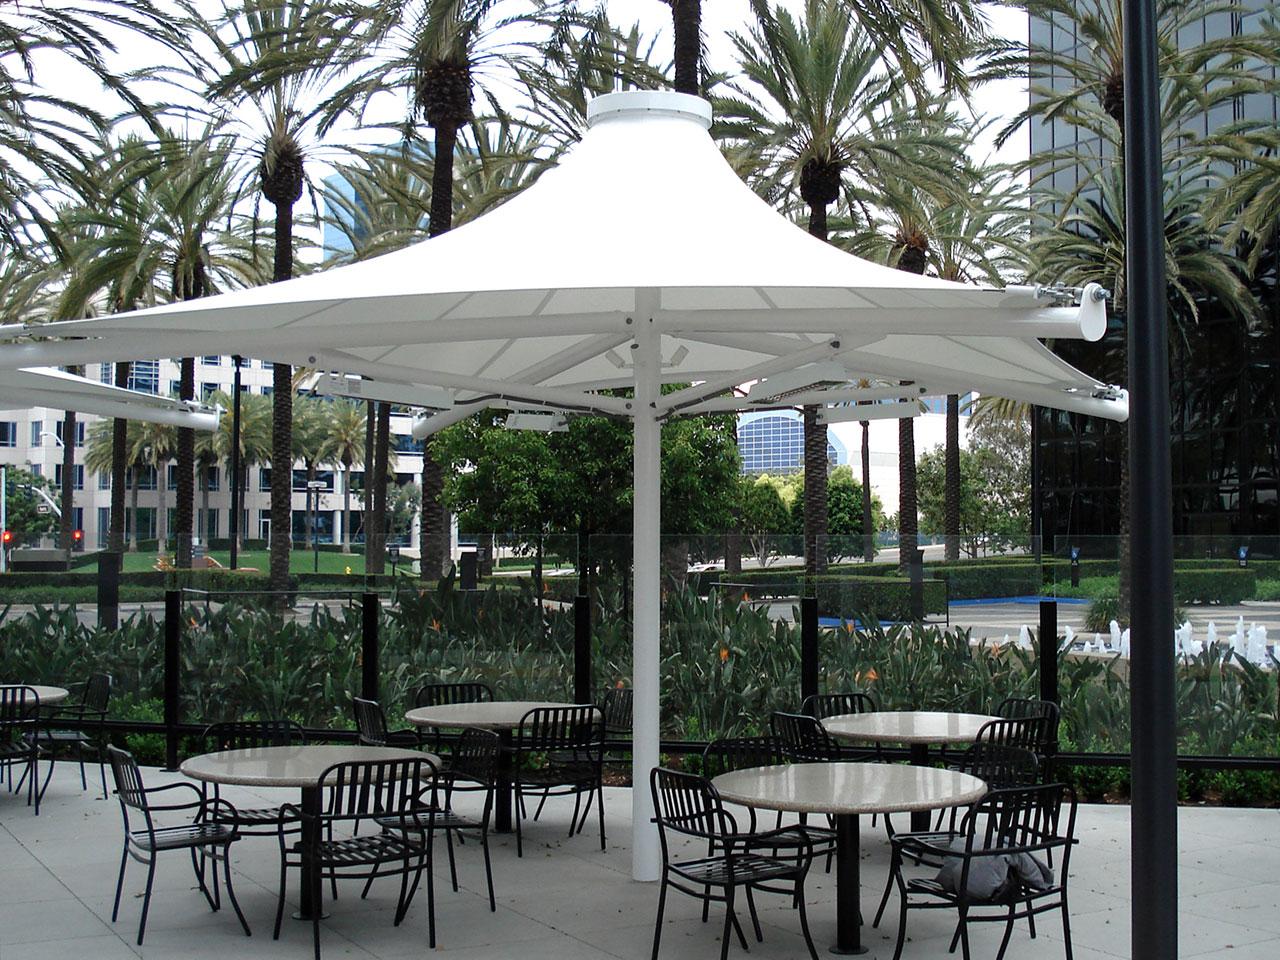 outdoor seating near multiple palm trees